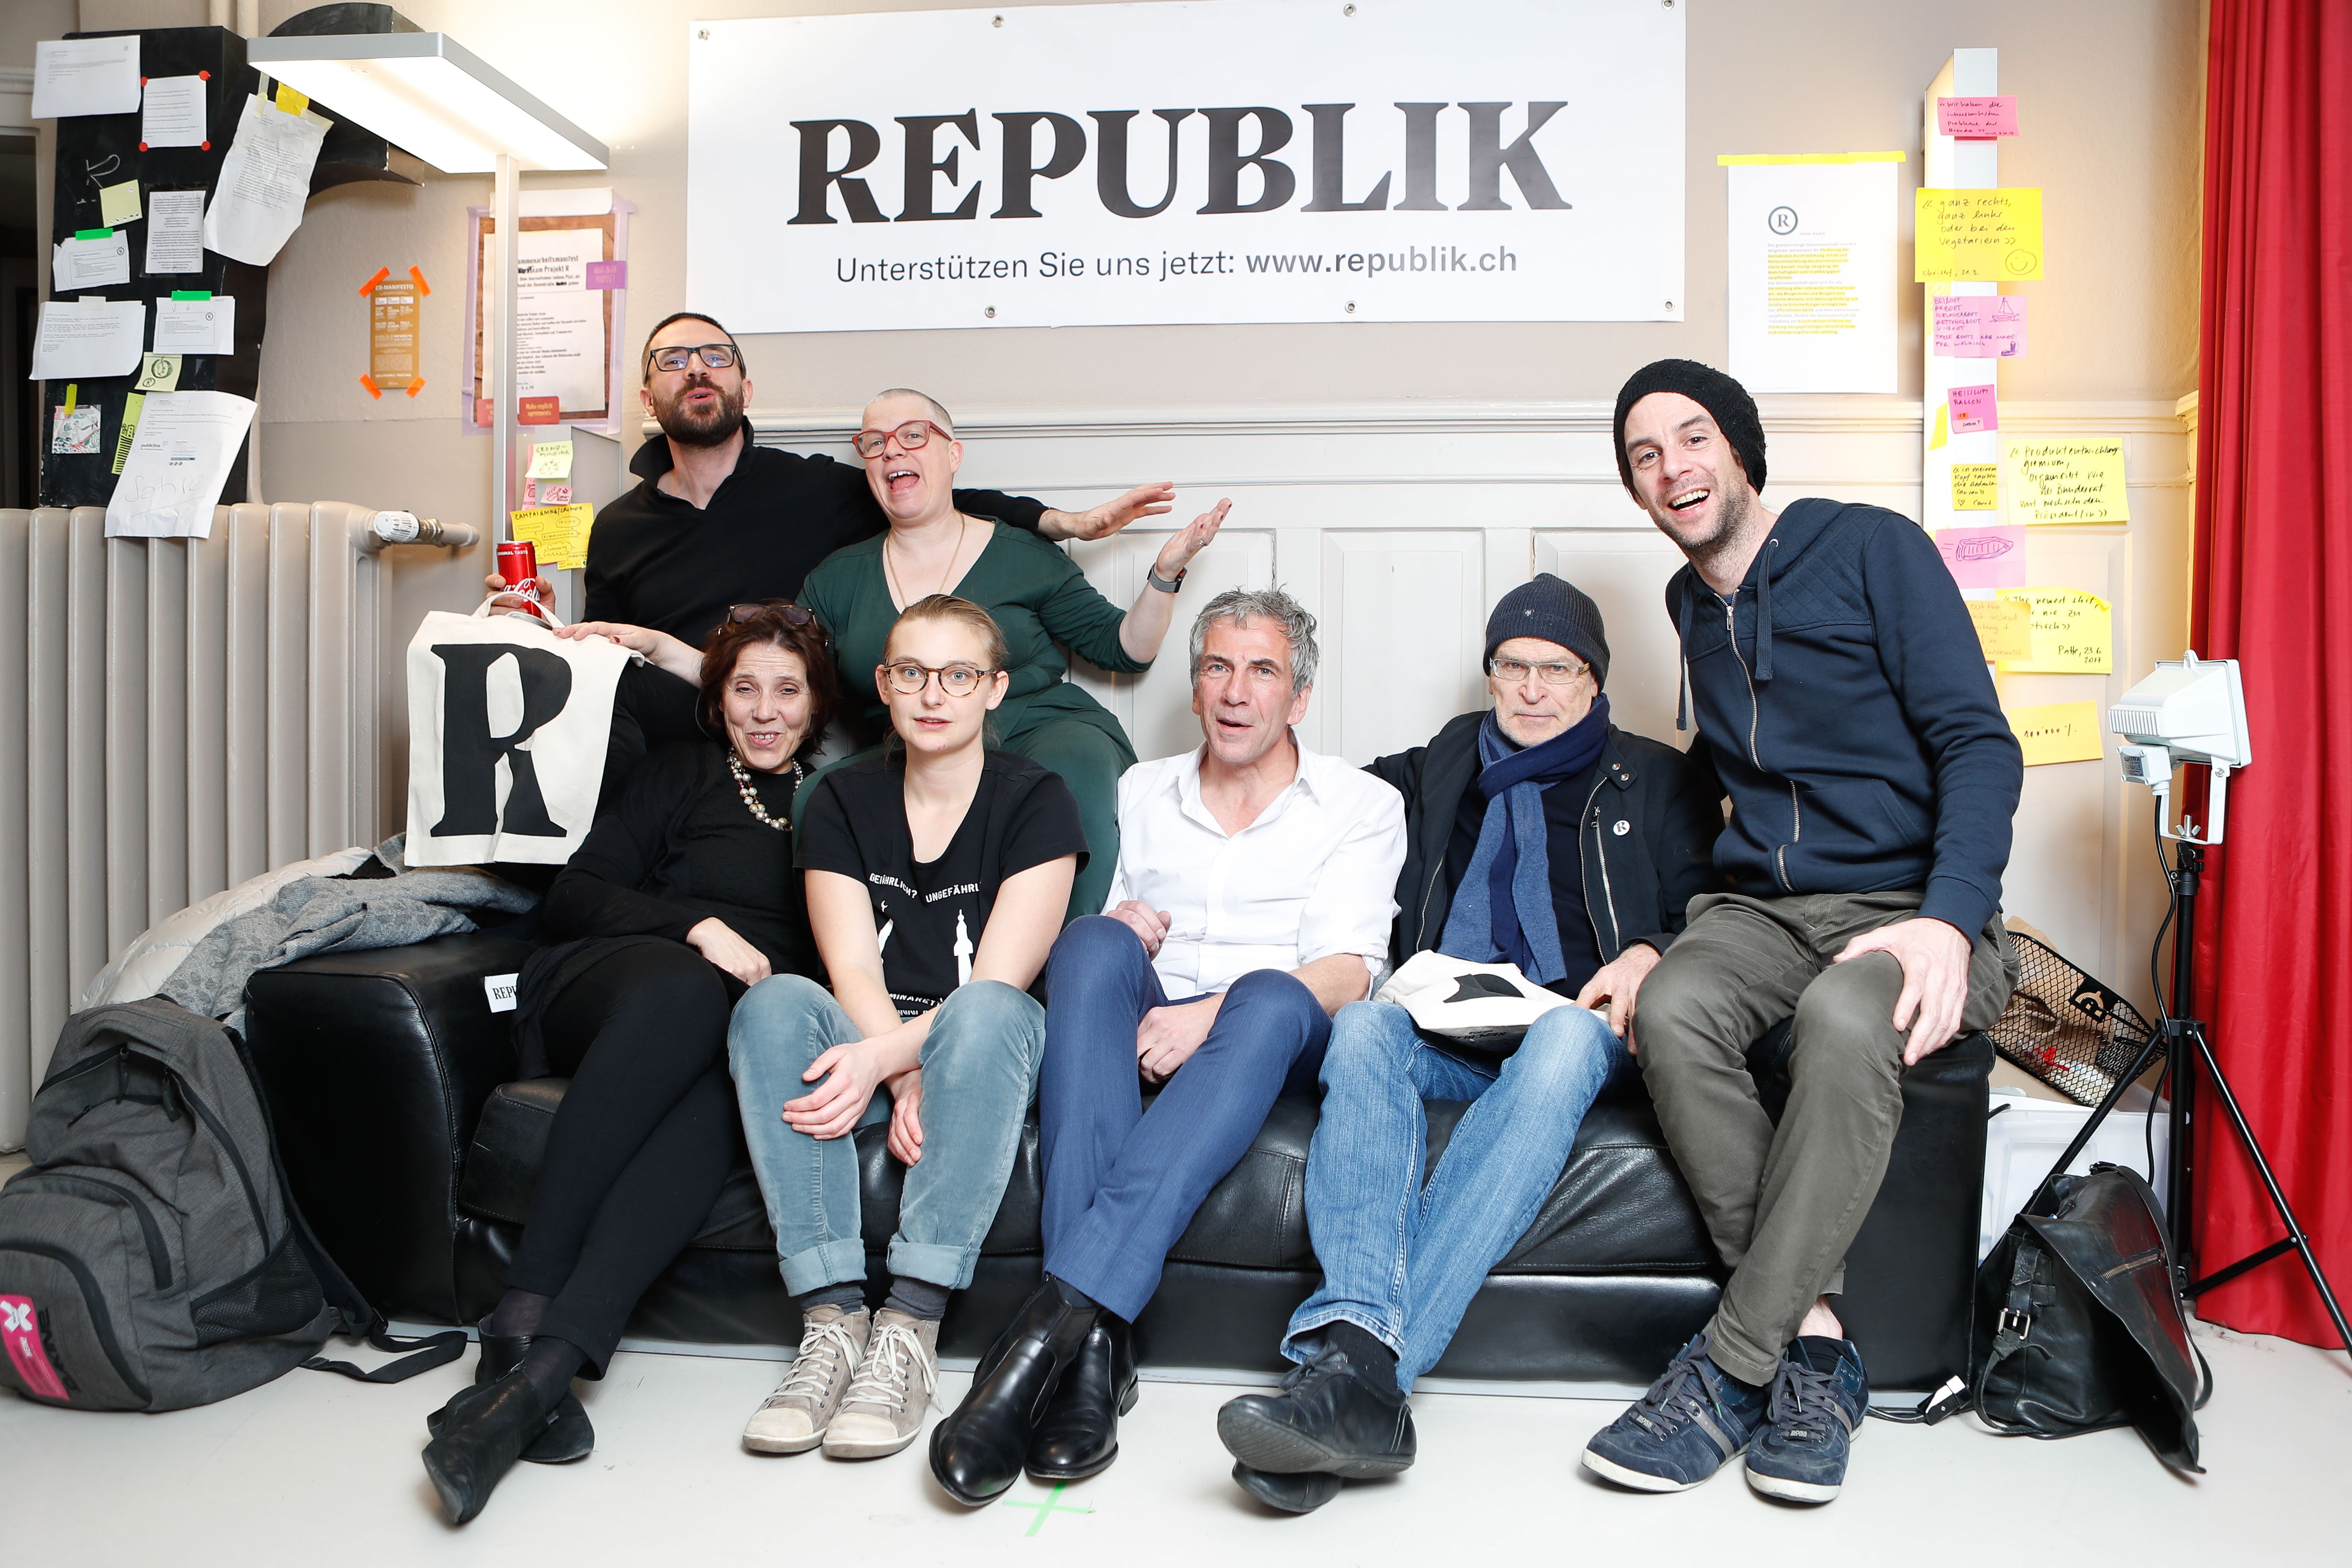 The six founding members of Republik, pictured in January 2018 on the
German-language publication’s launch day. The team—from left, Laurent Brust, Susanne Sugimoto, Nadja Schnetzler, Clara Vuillemin, Constantin Seibt, and Christof Moser—is joined by German investigative journalist Günter Wallraff, second from right